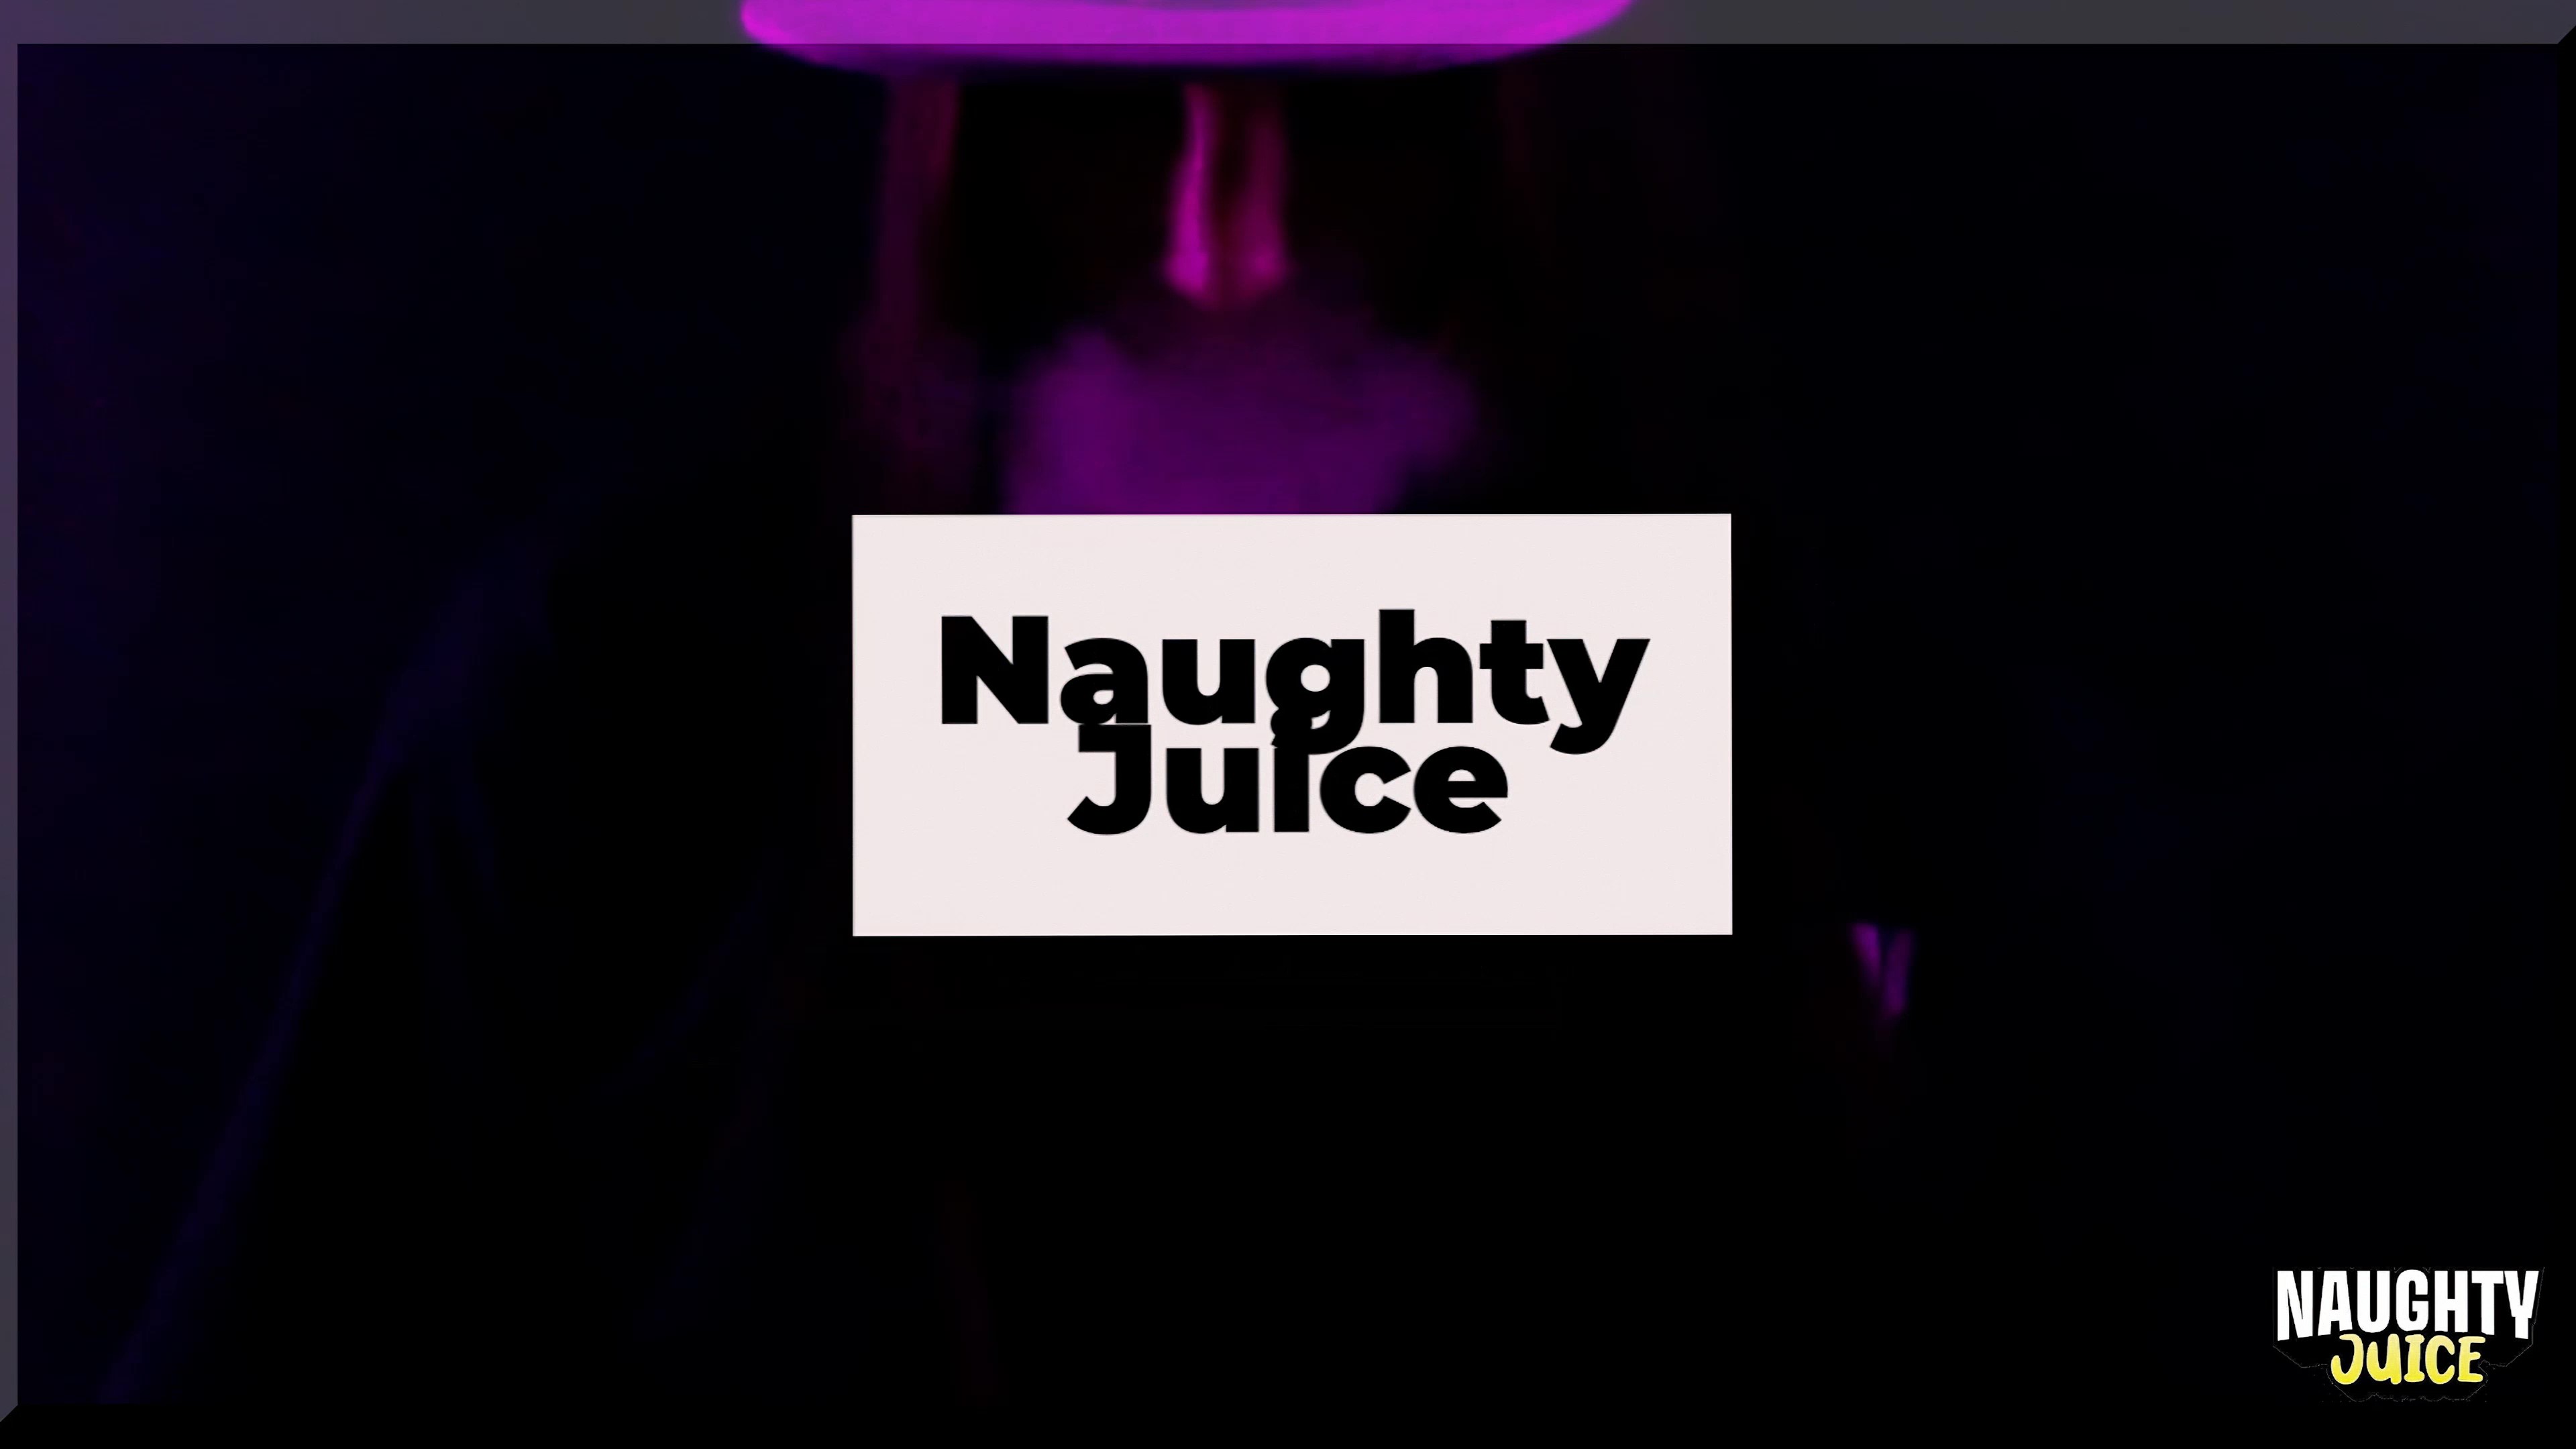 Naughty Juice Product Video Production
